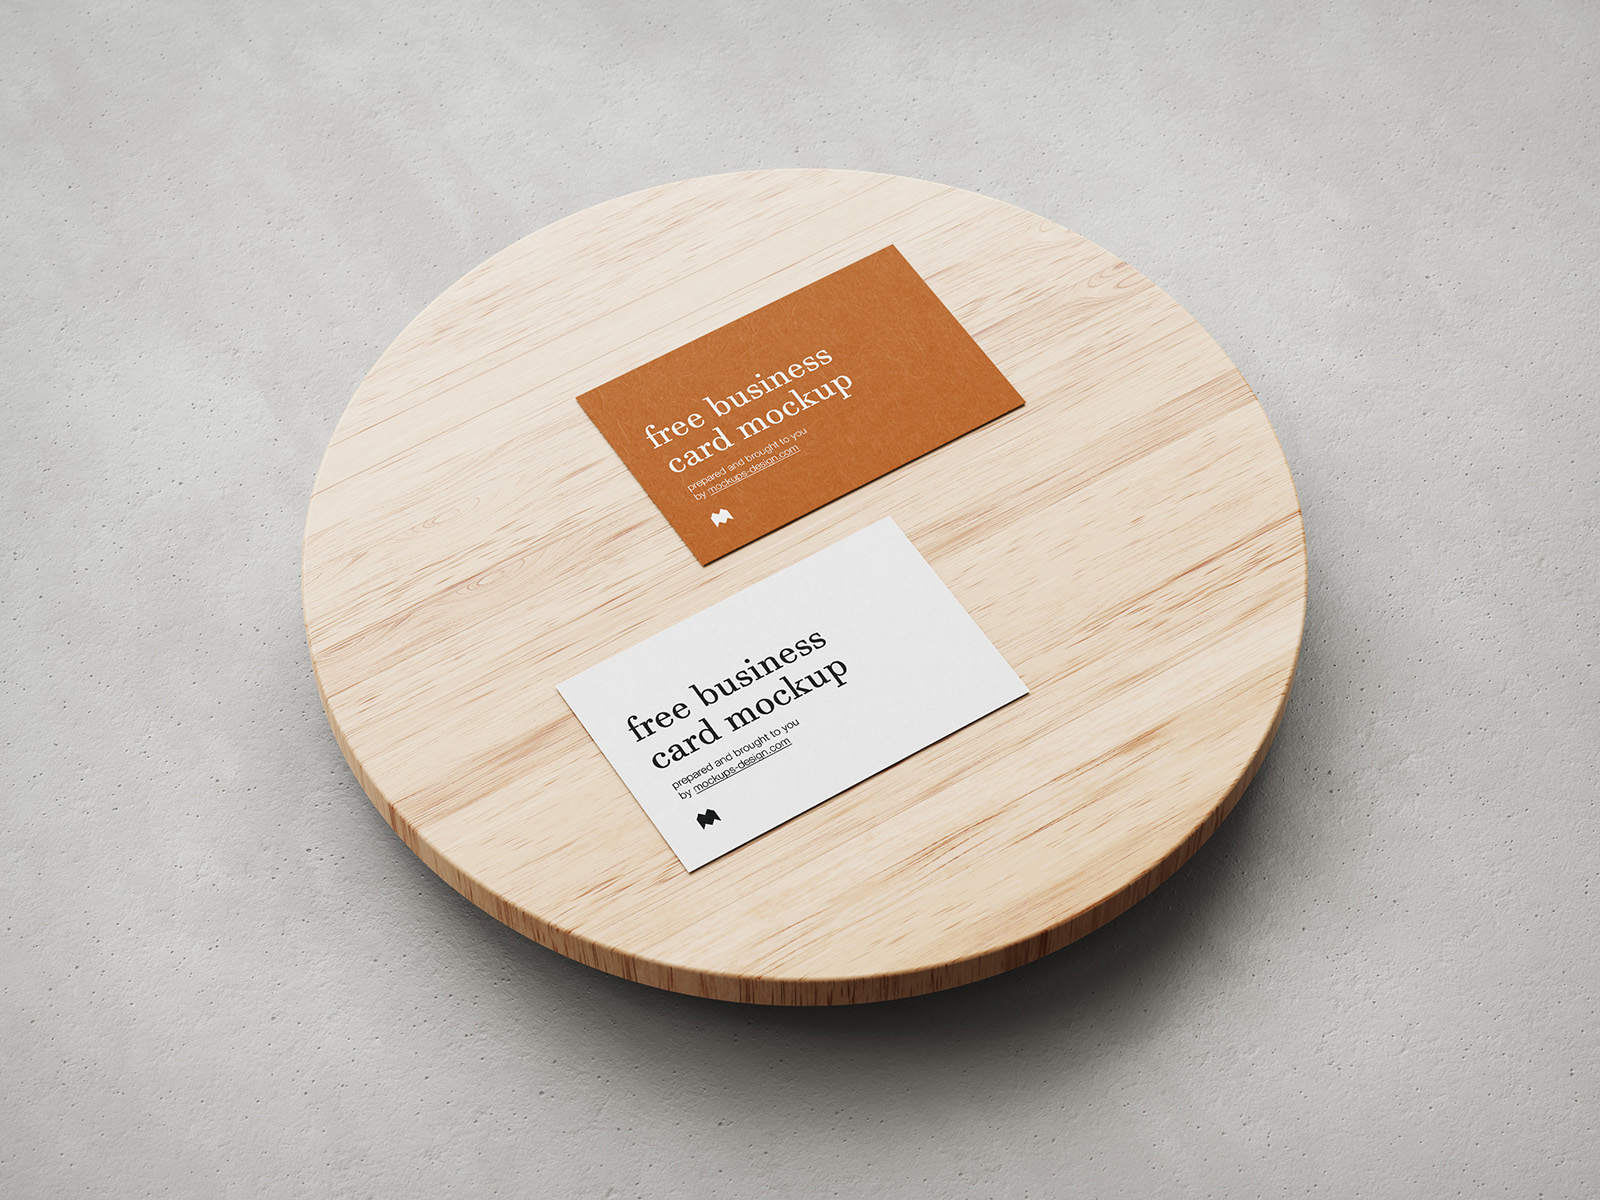 Free business cards mockup